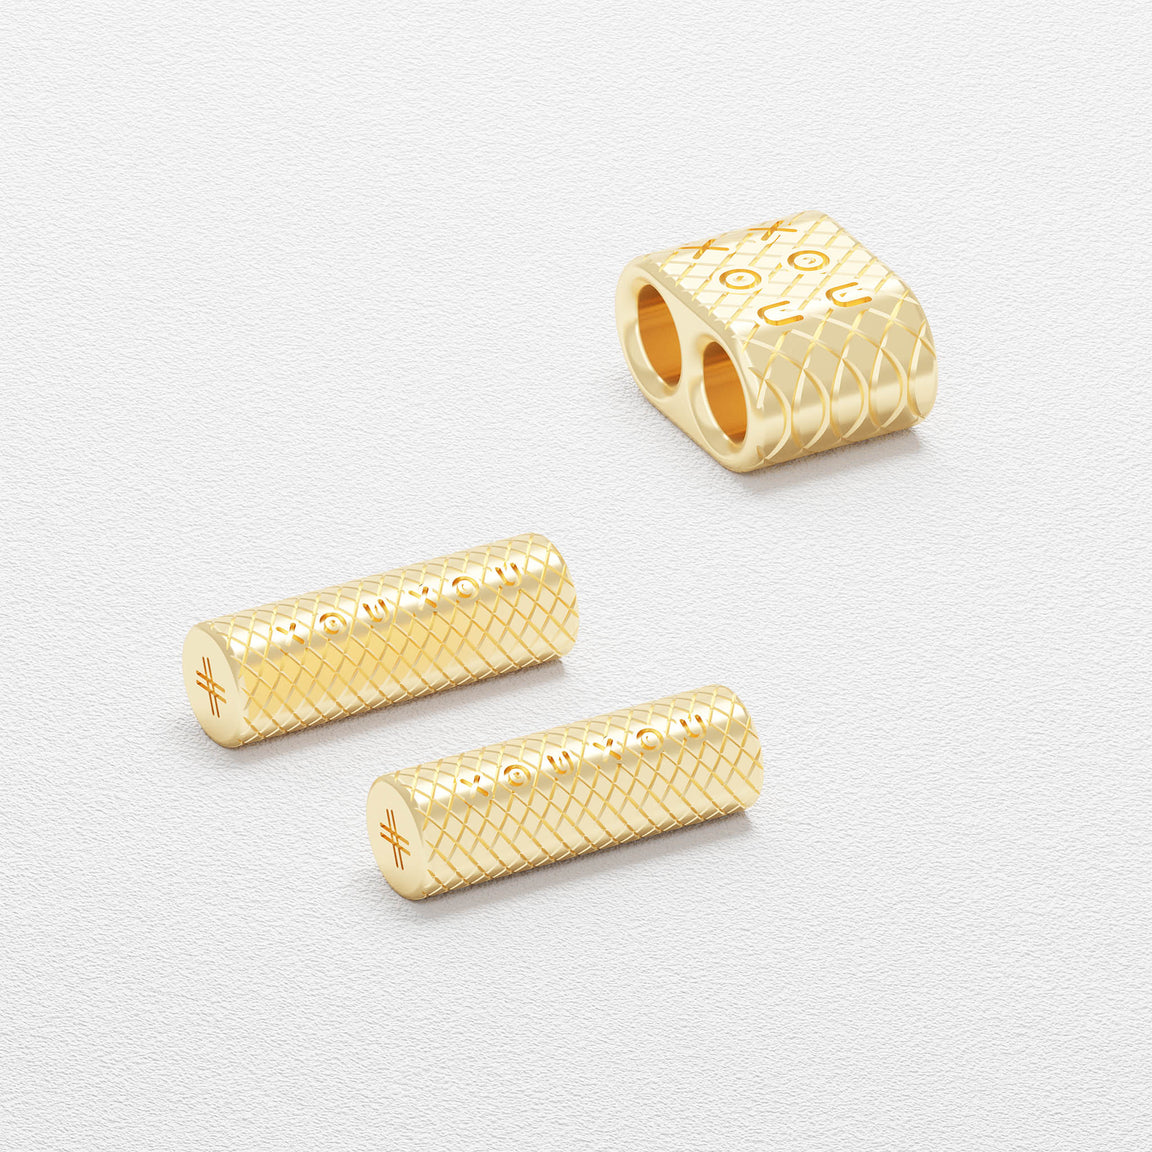 Glossy Gold metal parts for Modular Ropes by XOUXOU